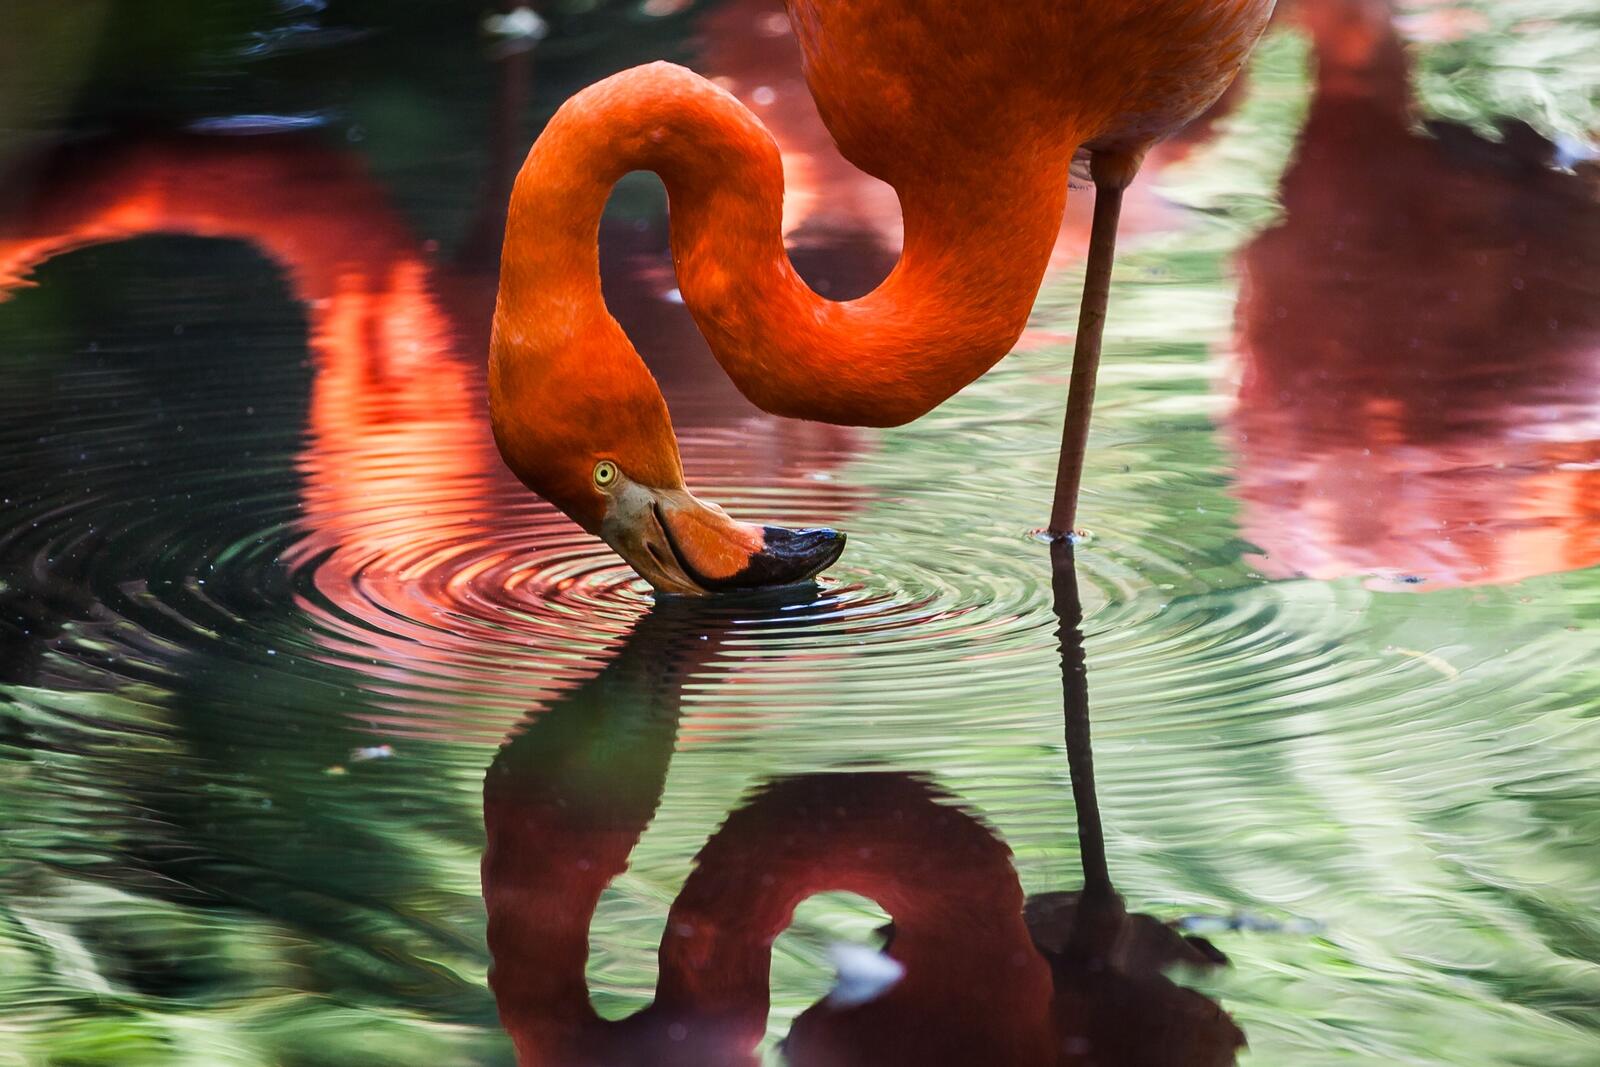 Free photo A red flamingo dipped its beak into the water